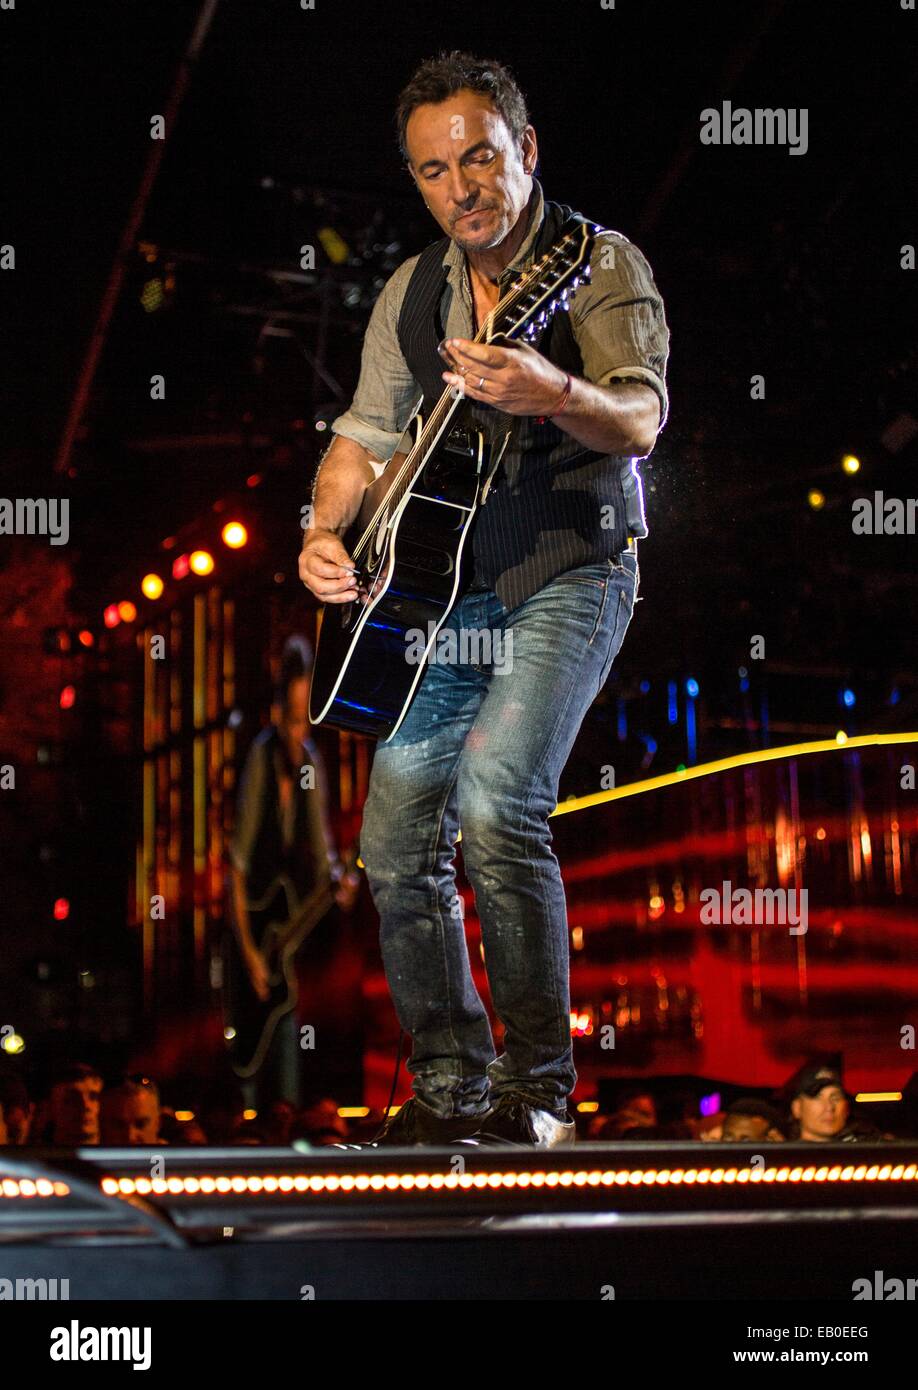 Rock superstar entertainer Bruce Springsteen plays harmonica and guitar  during the Concert for Valor November 11, 2014 in Washington, D.C Stock  Photo - Alamy